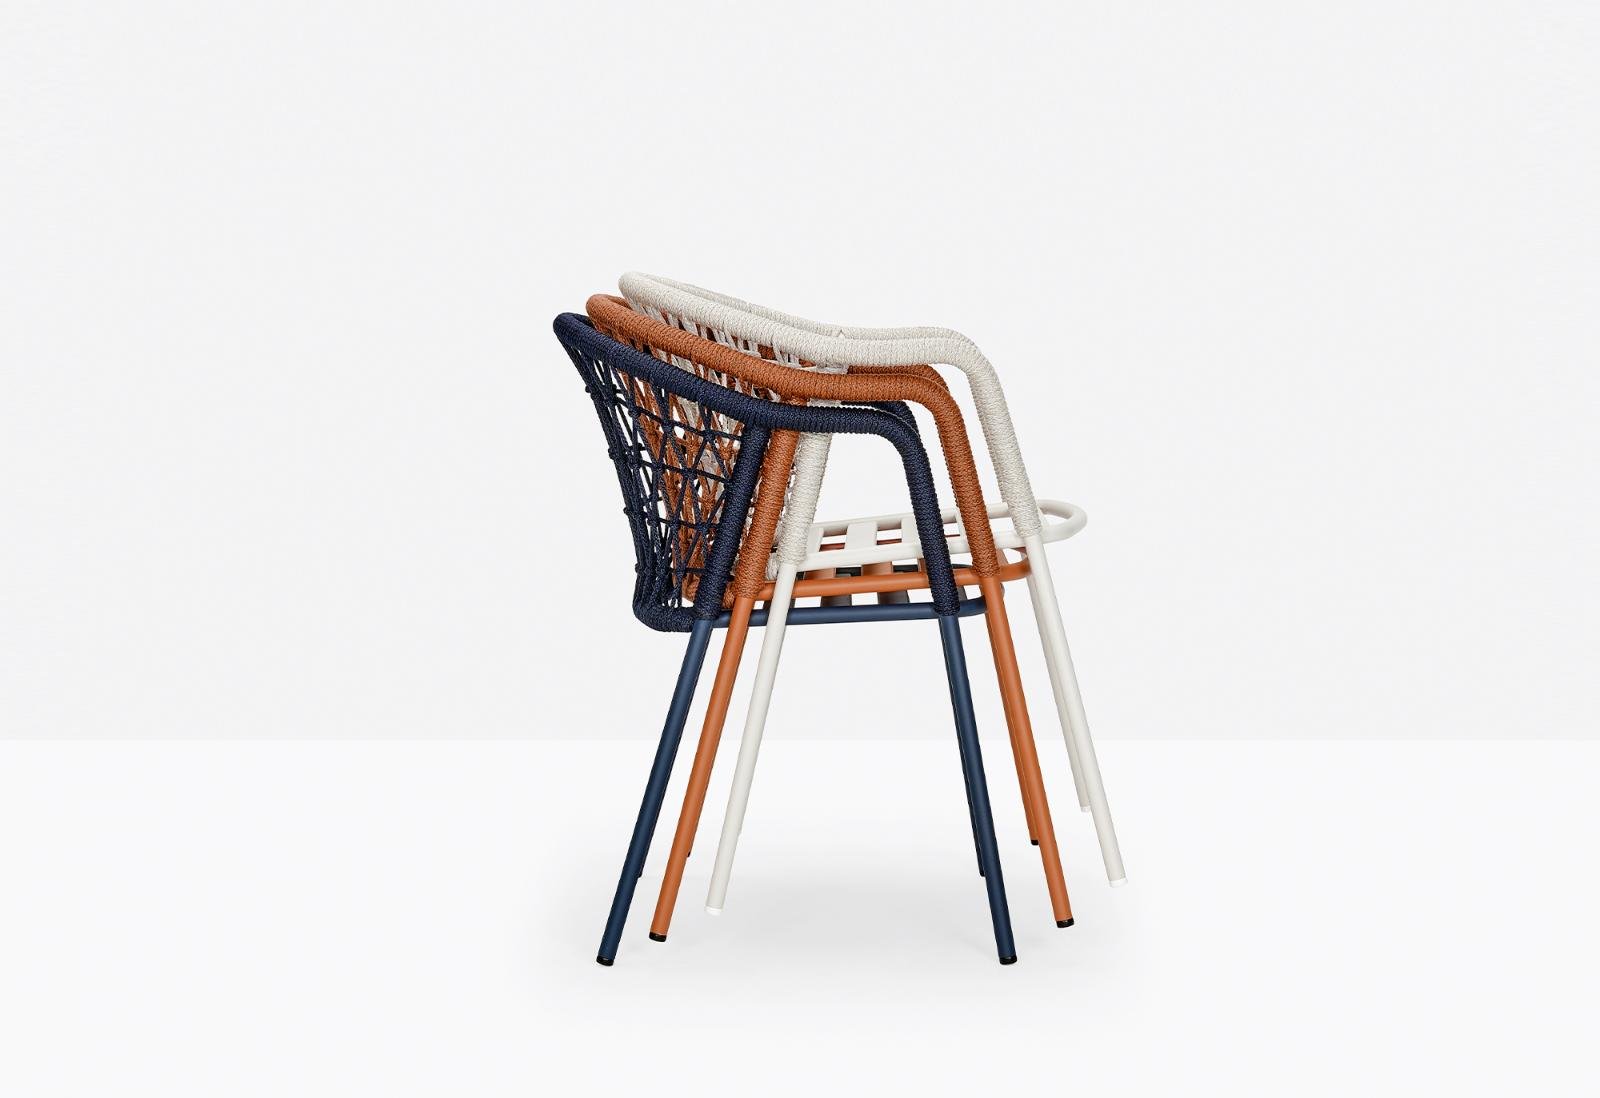 Panarea Chair from Pedrali, designed by CMP Design